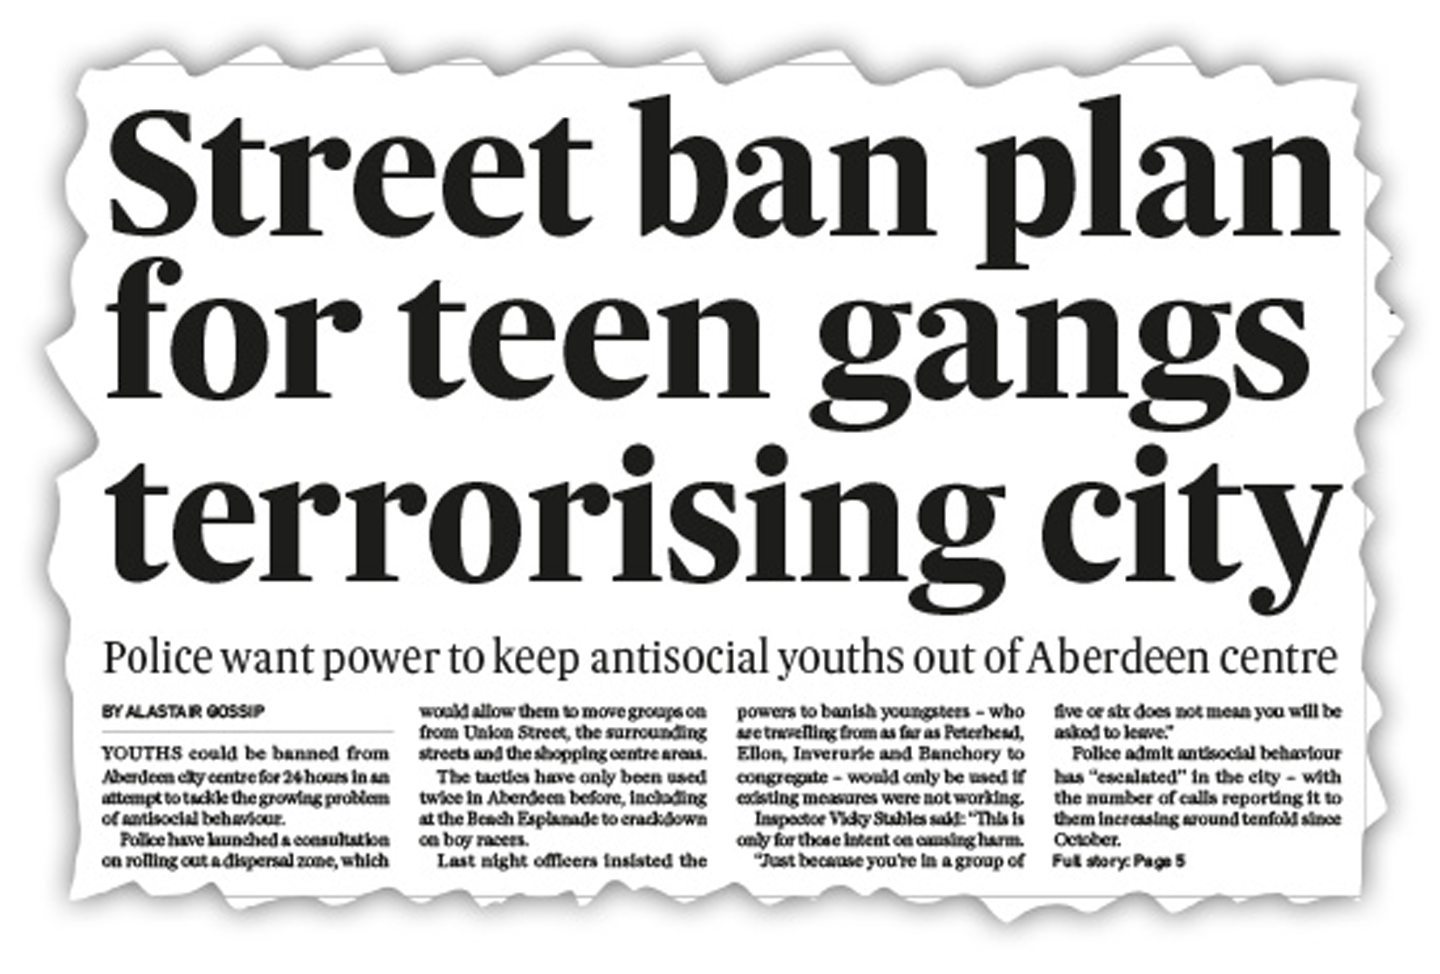 The P&J newspaper coverage revealed the planned ban on youth gangs in Aberdeen city centre on the front page, on May 10 2019.